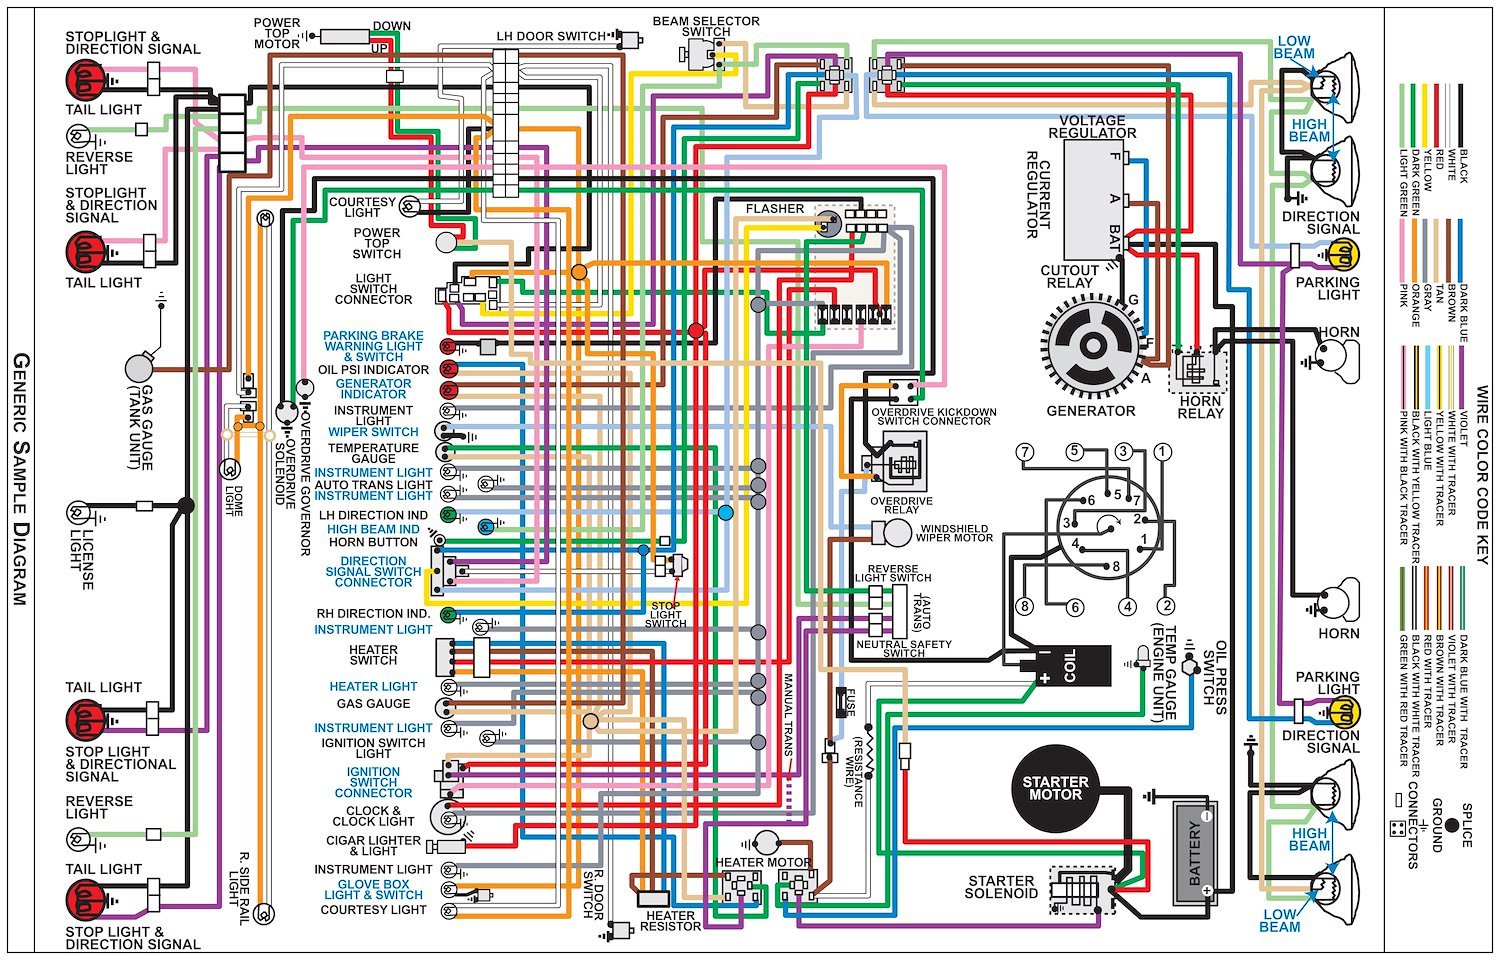 Jegs 19234 Wiring Diagram 1967 Chevy